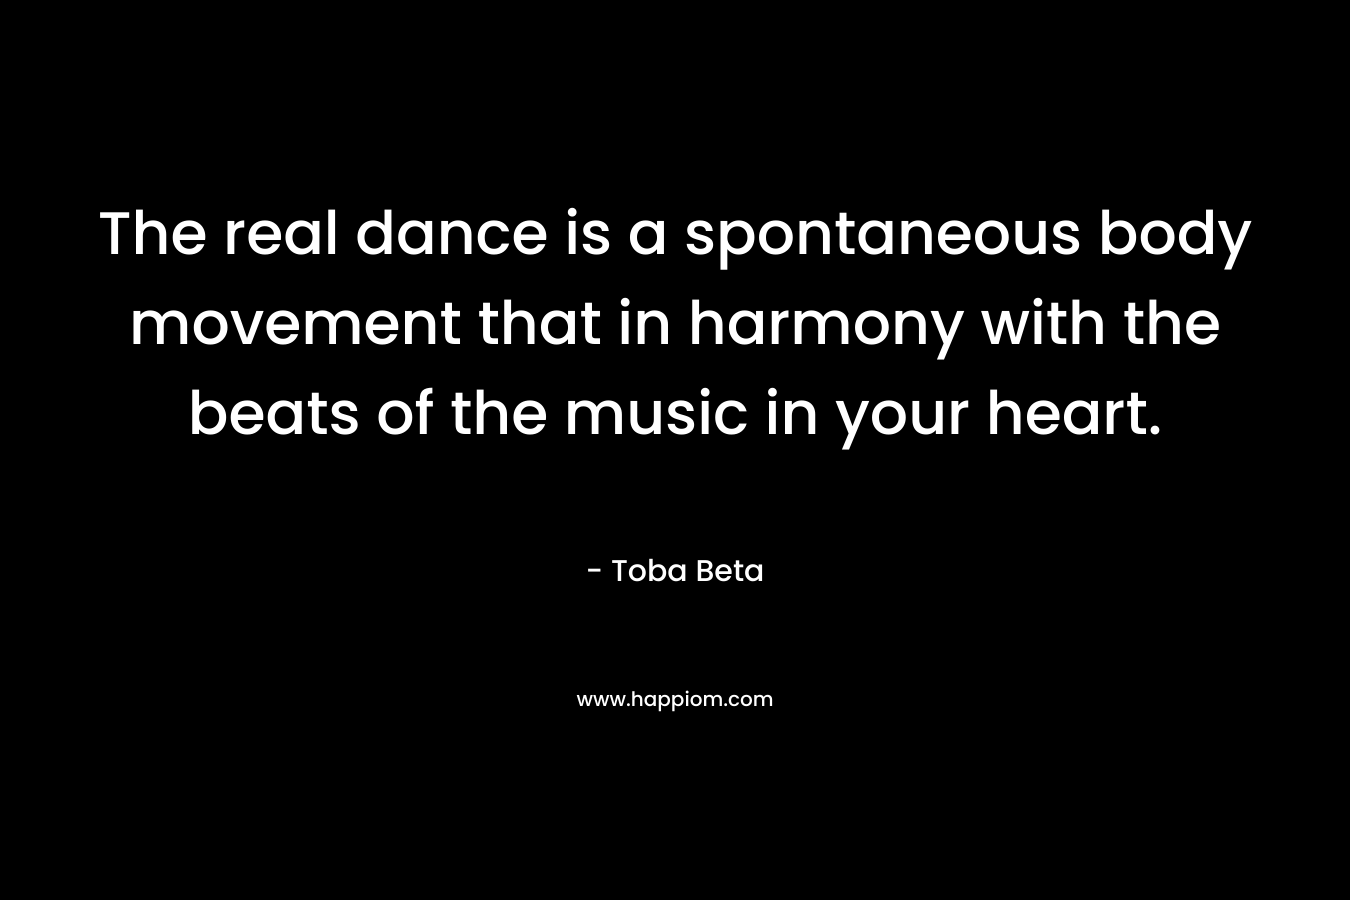 The real dance is a spontaneous body movement that in harmony with the beats of the music in your heart.